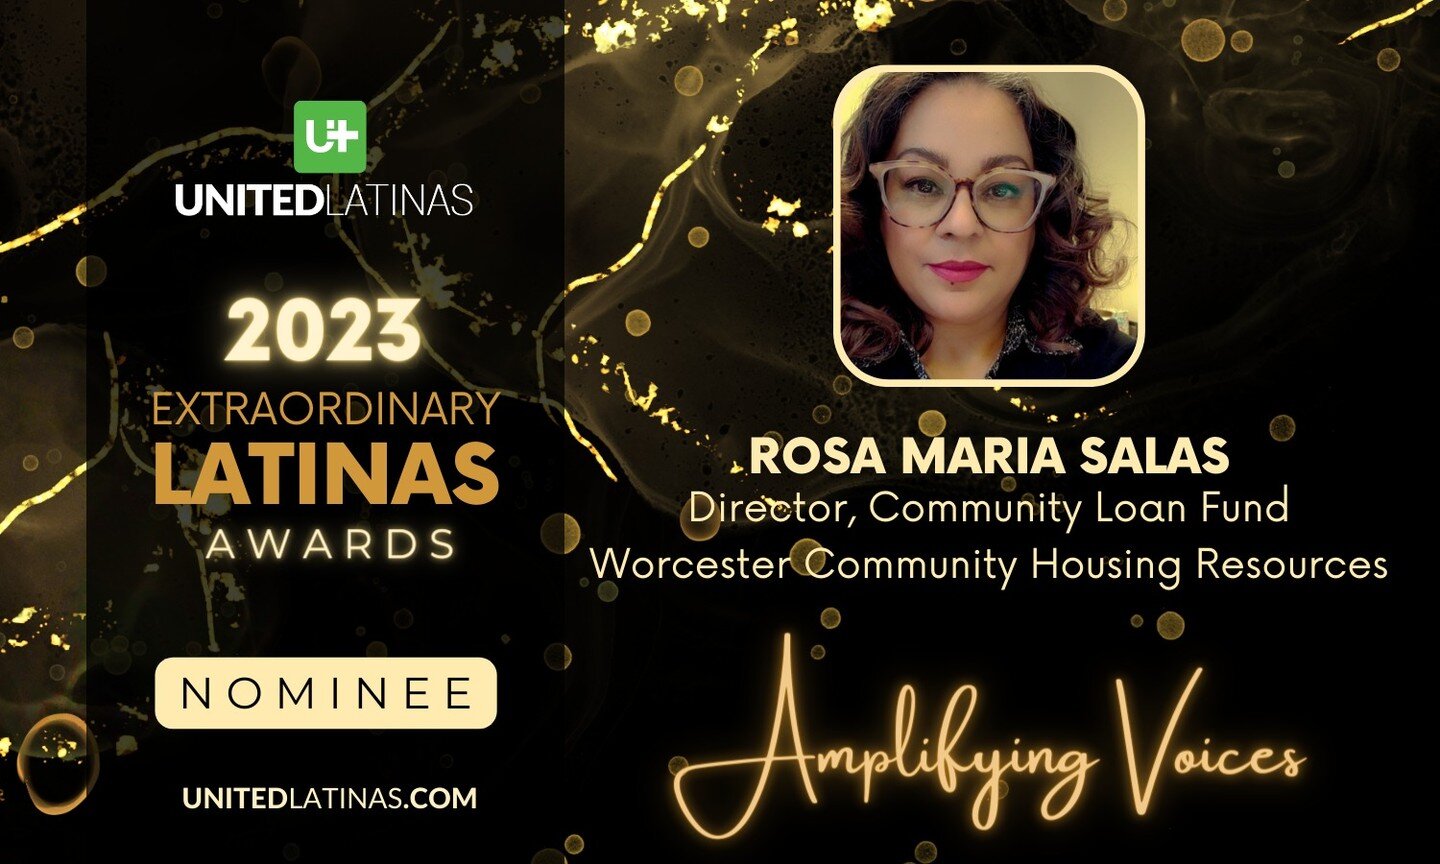 We are so proud of Rosa who is the Director of WCHR's Community Loan Fund. Congratulations on your nomination!